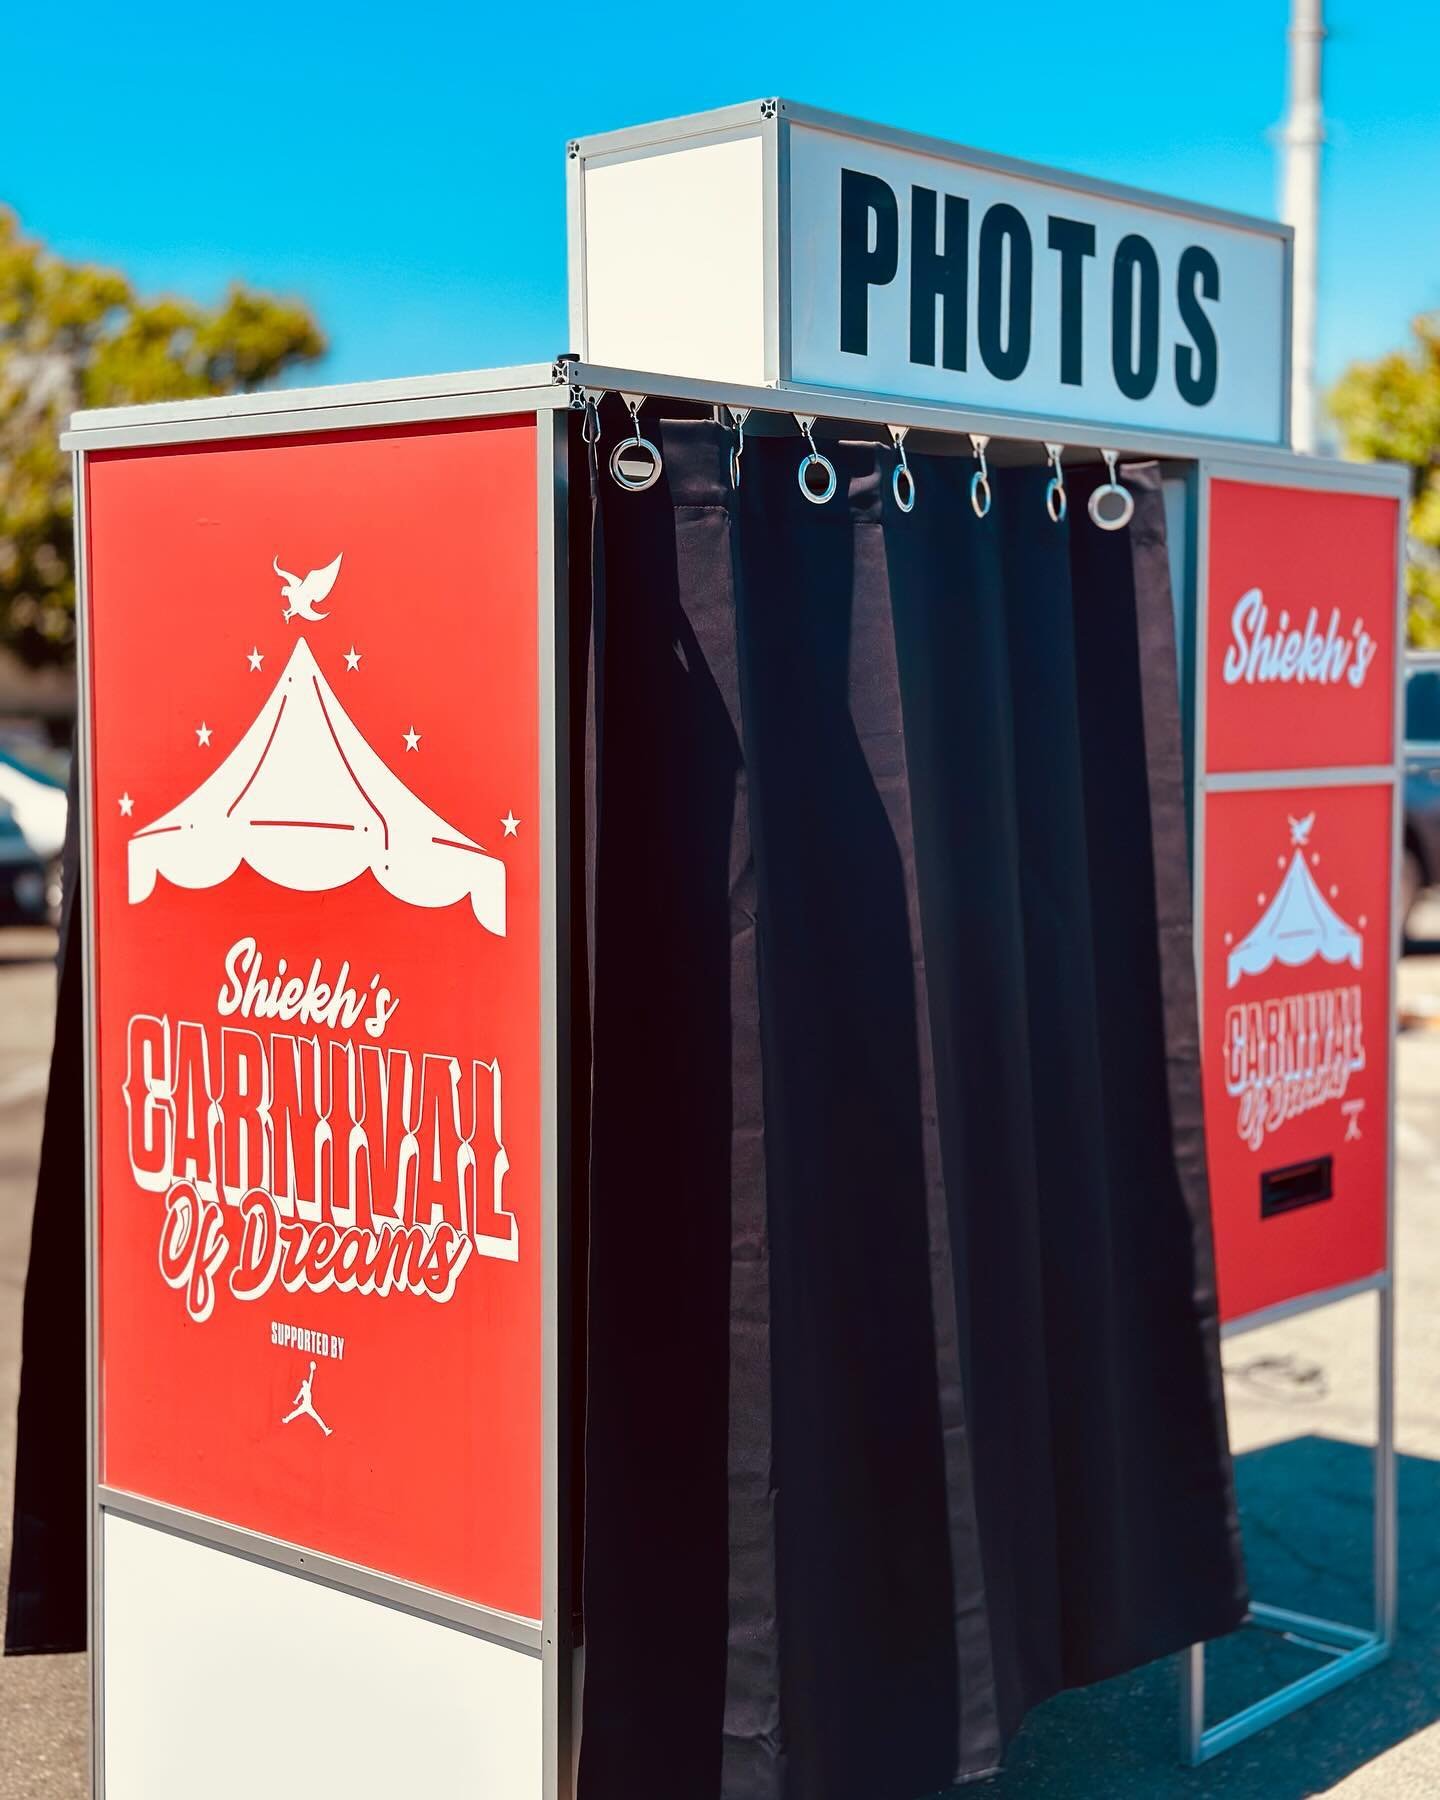 Custom Branding we did for Shiekh. Great event with a great turnout to help give back to the community and kids. Glad we got to be a part of such an awesome event!!!
.
.
.
.
.
.
.
.
.
.
#shiekhshoes #lbc #longbeach #photobooth #events #weddings #part